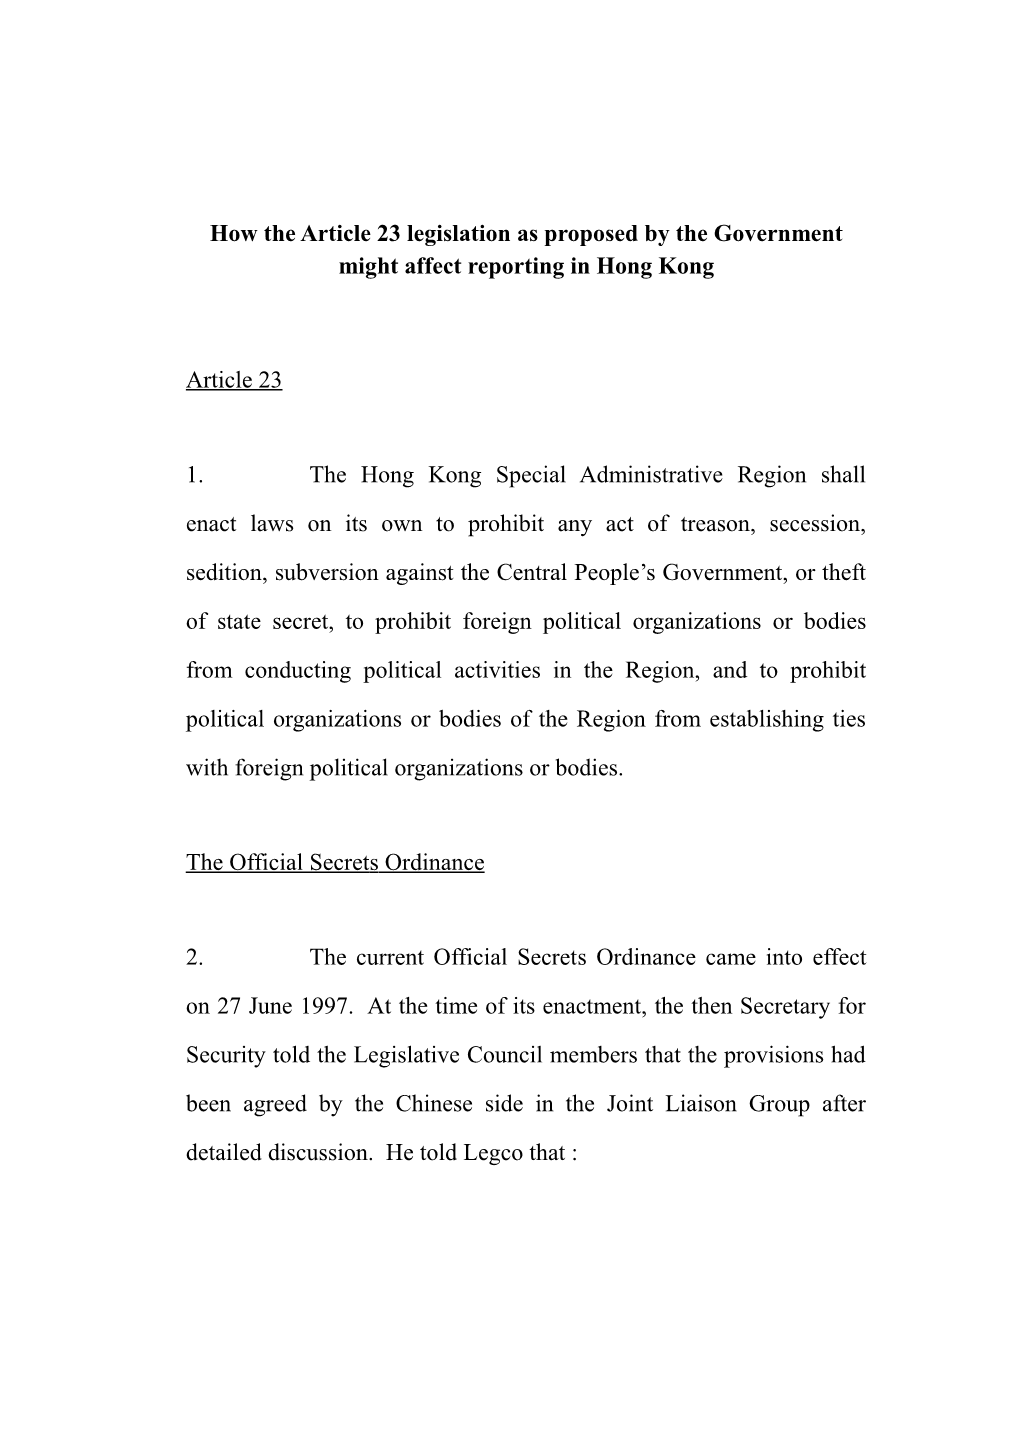 How the Article 23 Legislation As Proposed by the Government Might Affect Reporting in Hong Kong